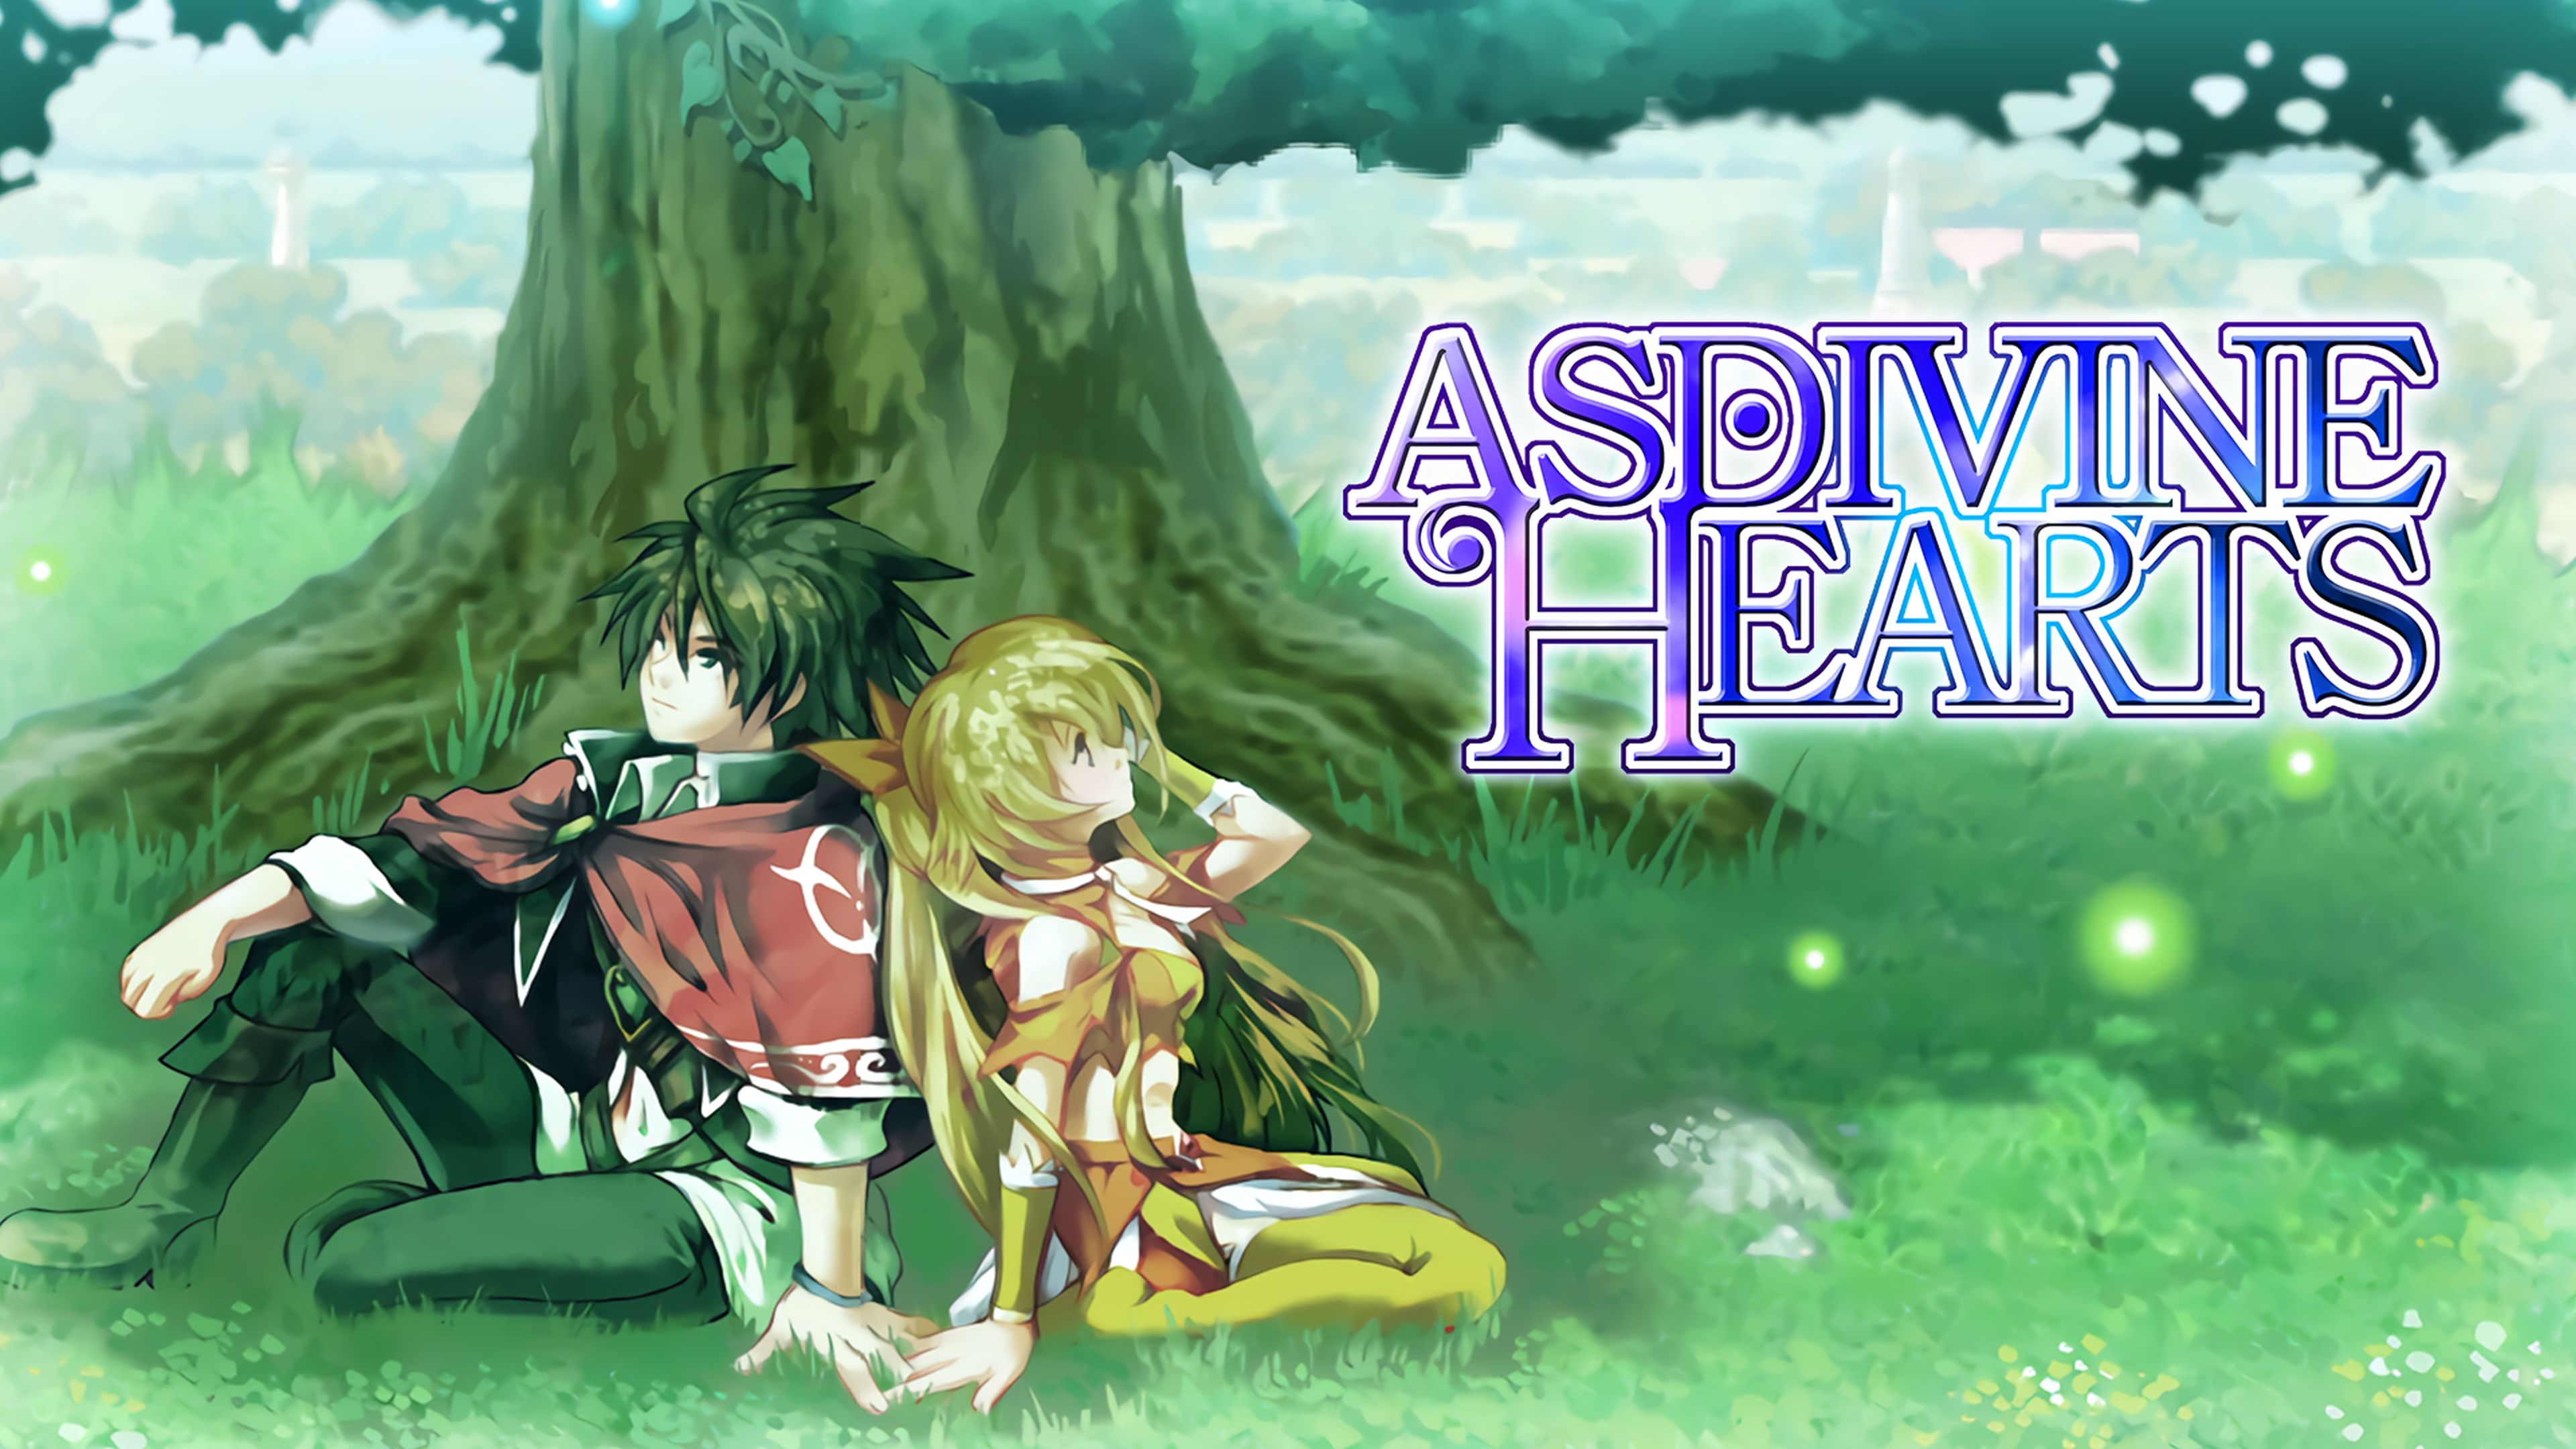 Old-school RPG Asdivine Hearts Coming to PS4, PS3, PS Vita This Winter –  PlayStation.Blog